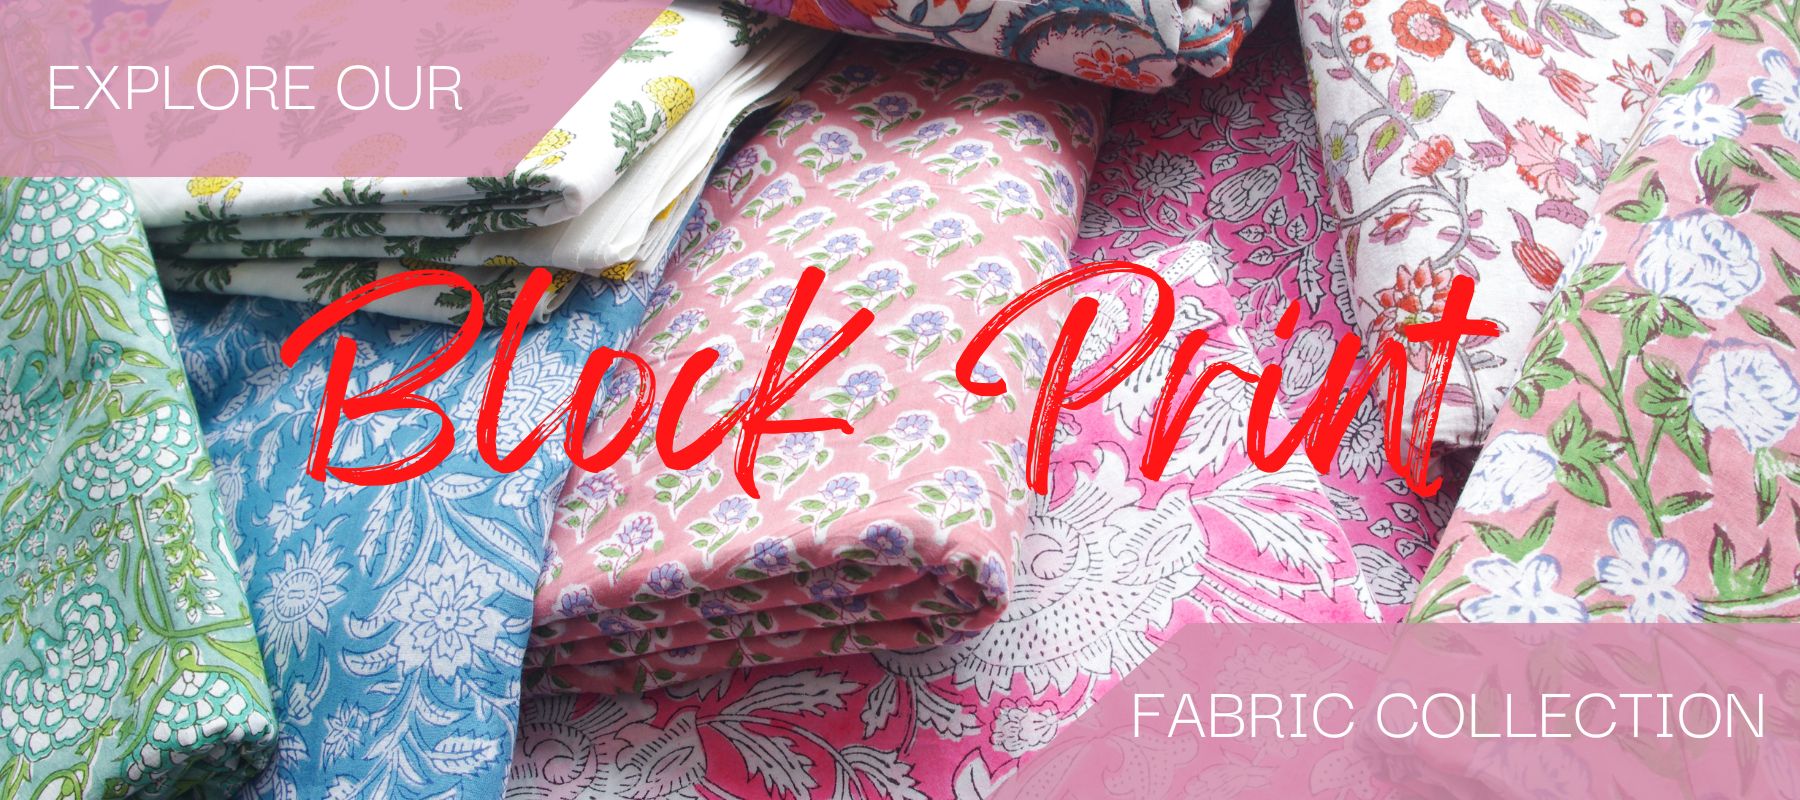 Hand Block Printed Fabric, Indian Kantha Quilts & Bedspreads, Tapestry ...